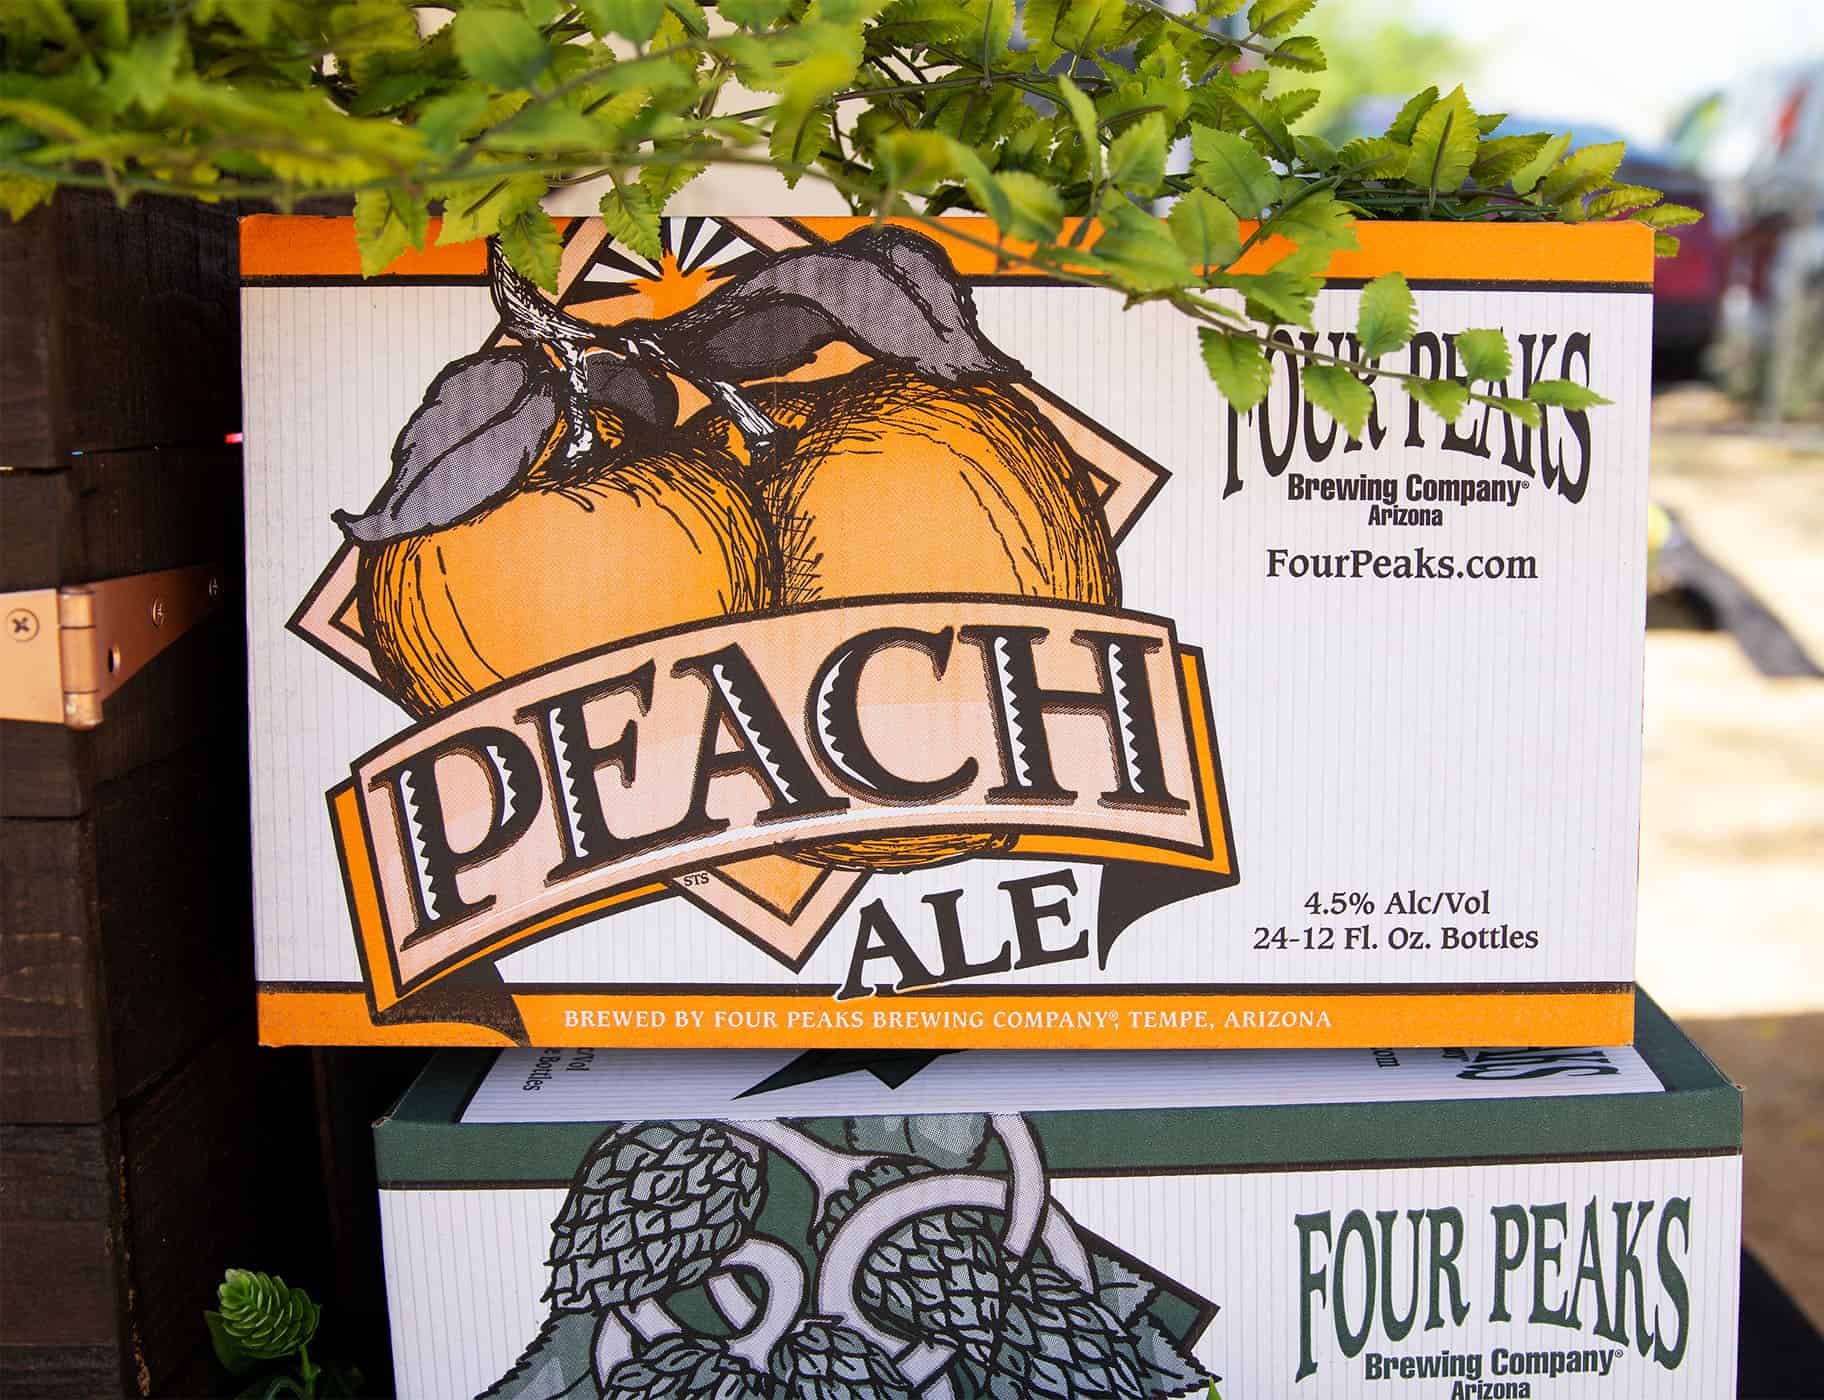 Boxes of Four Peaks Peach Ale at a beer festival in Phoenix, Arizona.